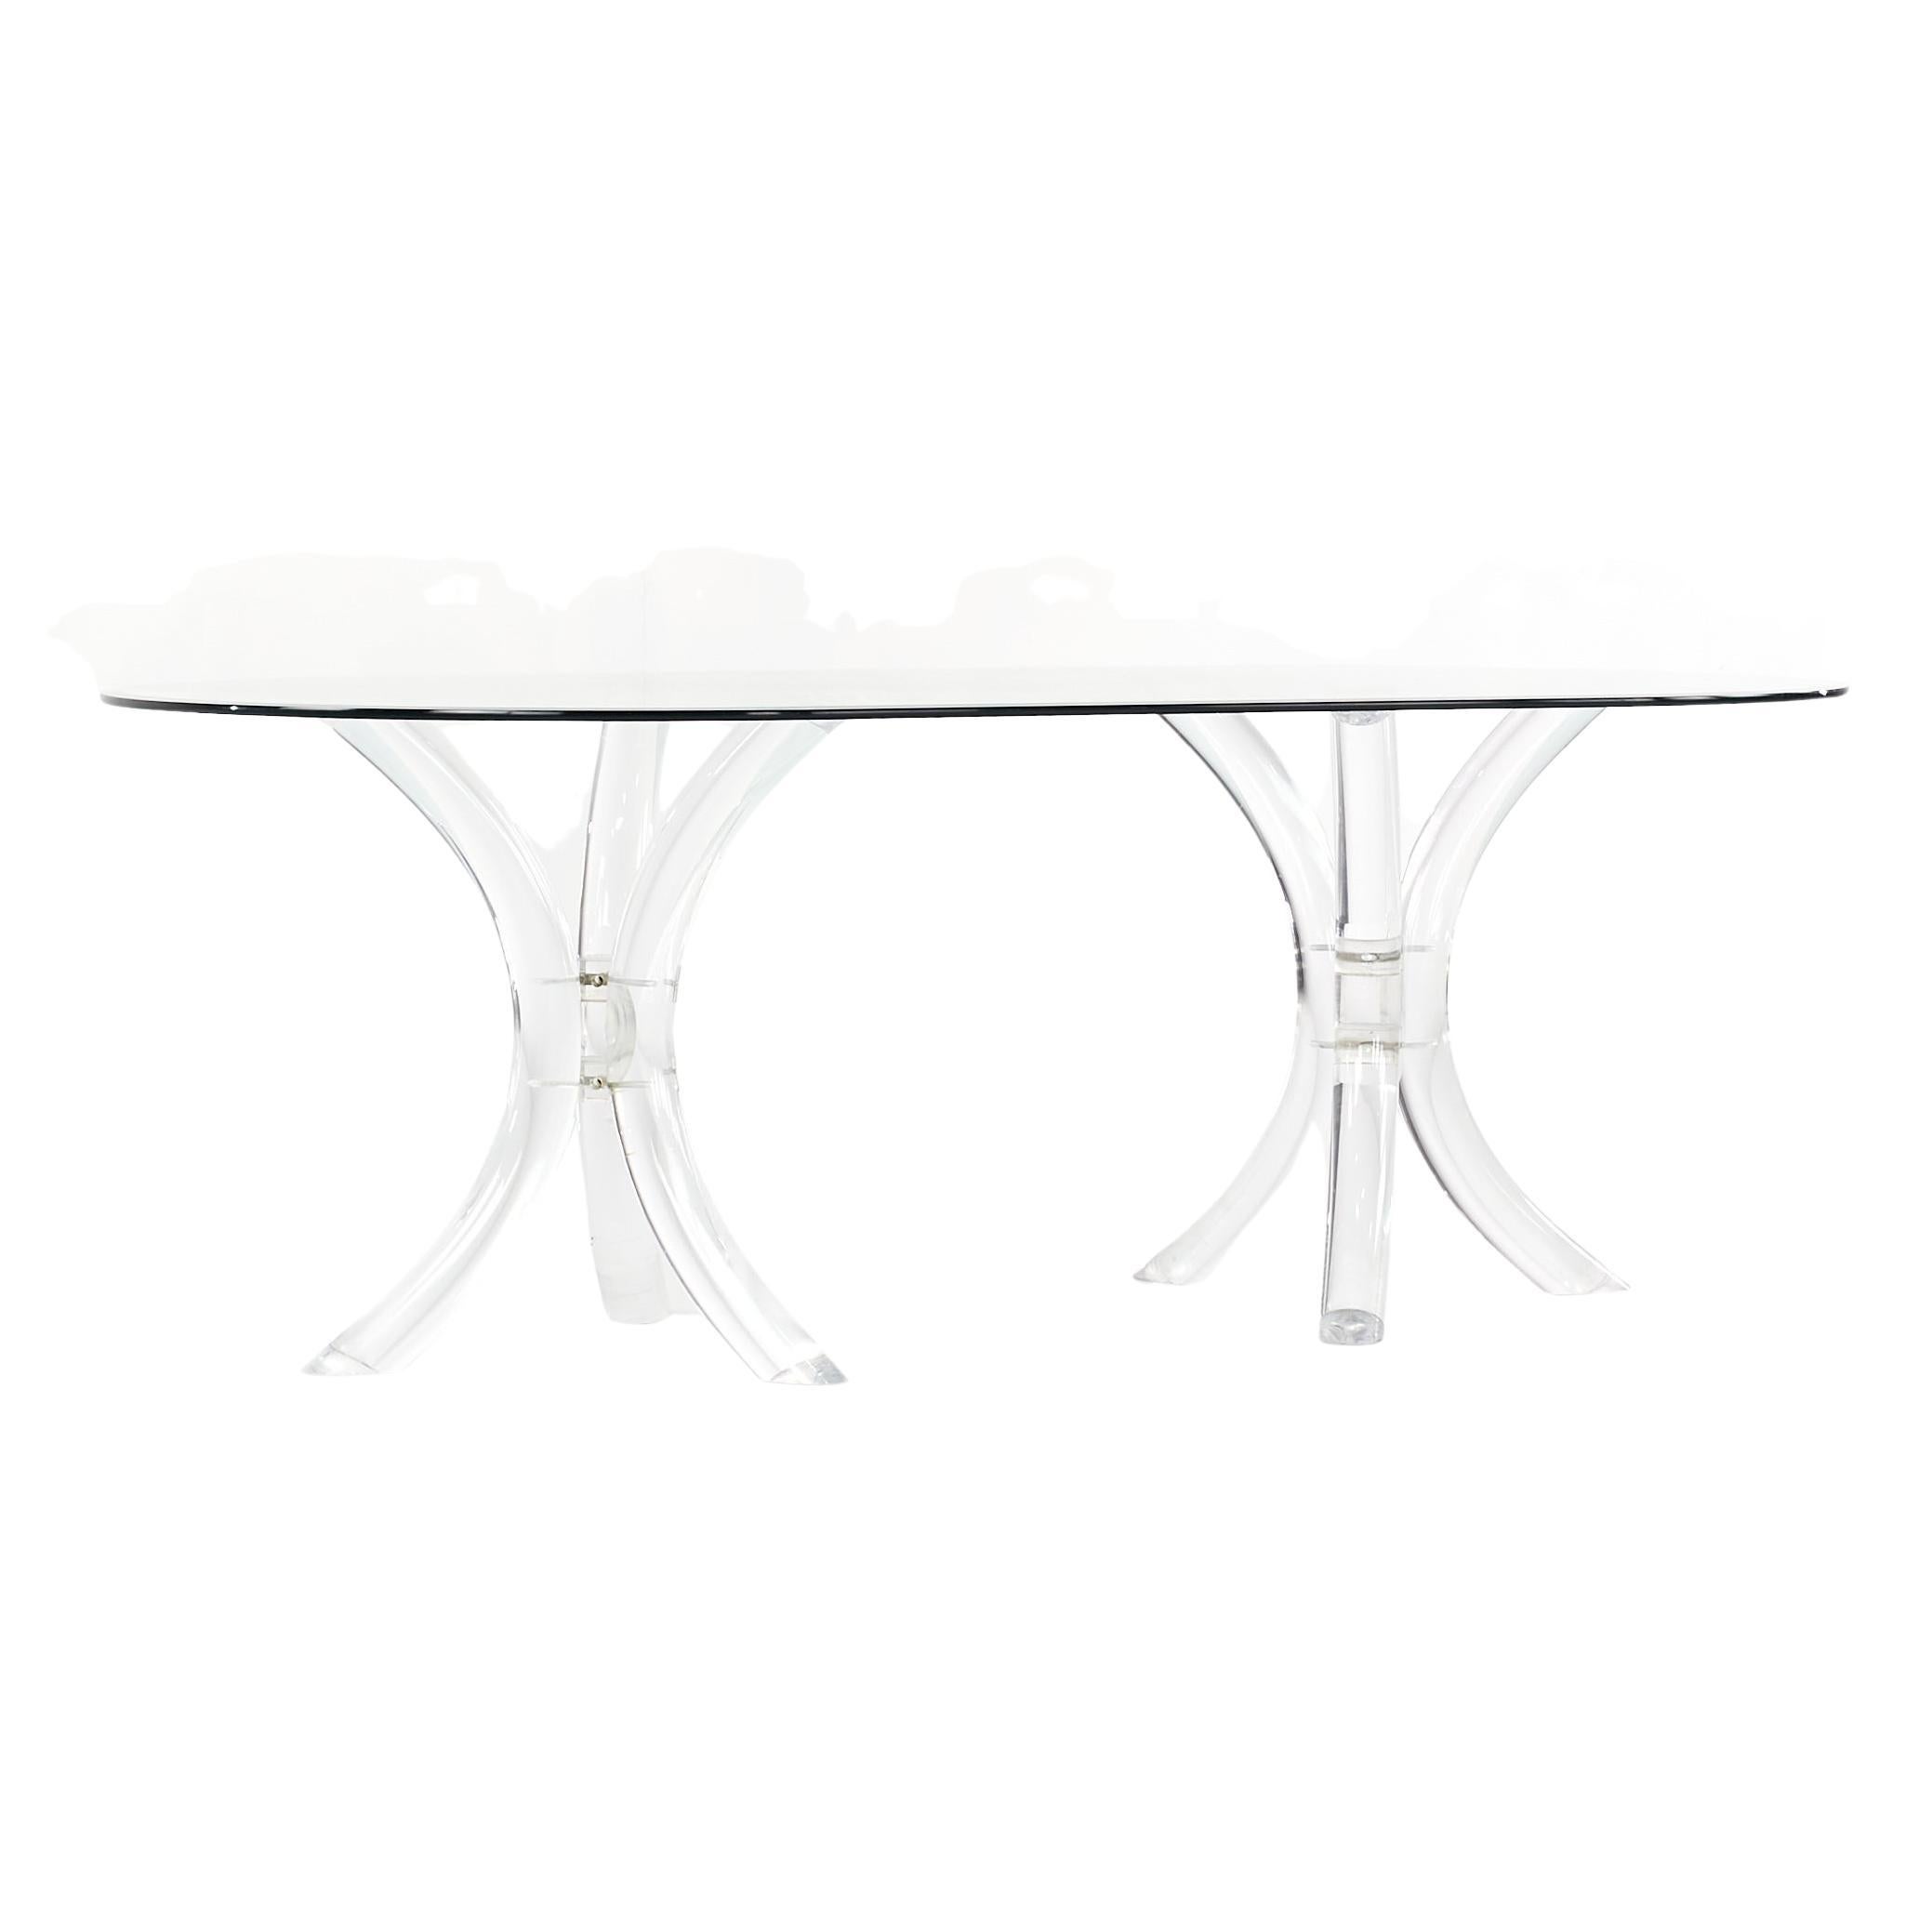 Charles Hollis Jones Mid Century Double Pedestal Lucite dining table

This table measures: 80 wide x 44 deep x 28.5 inches high, with a chair clearance of 28.25

All pieces of furniture can be had in what we call restored vintage condition. That